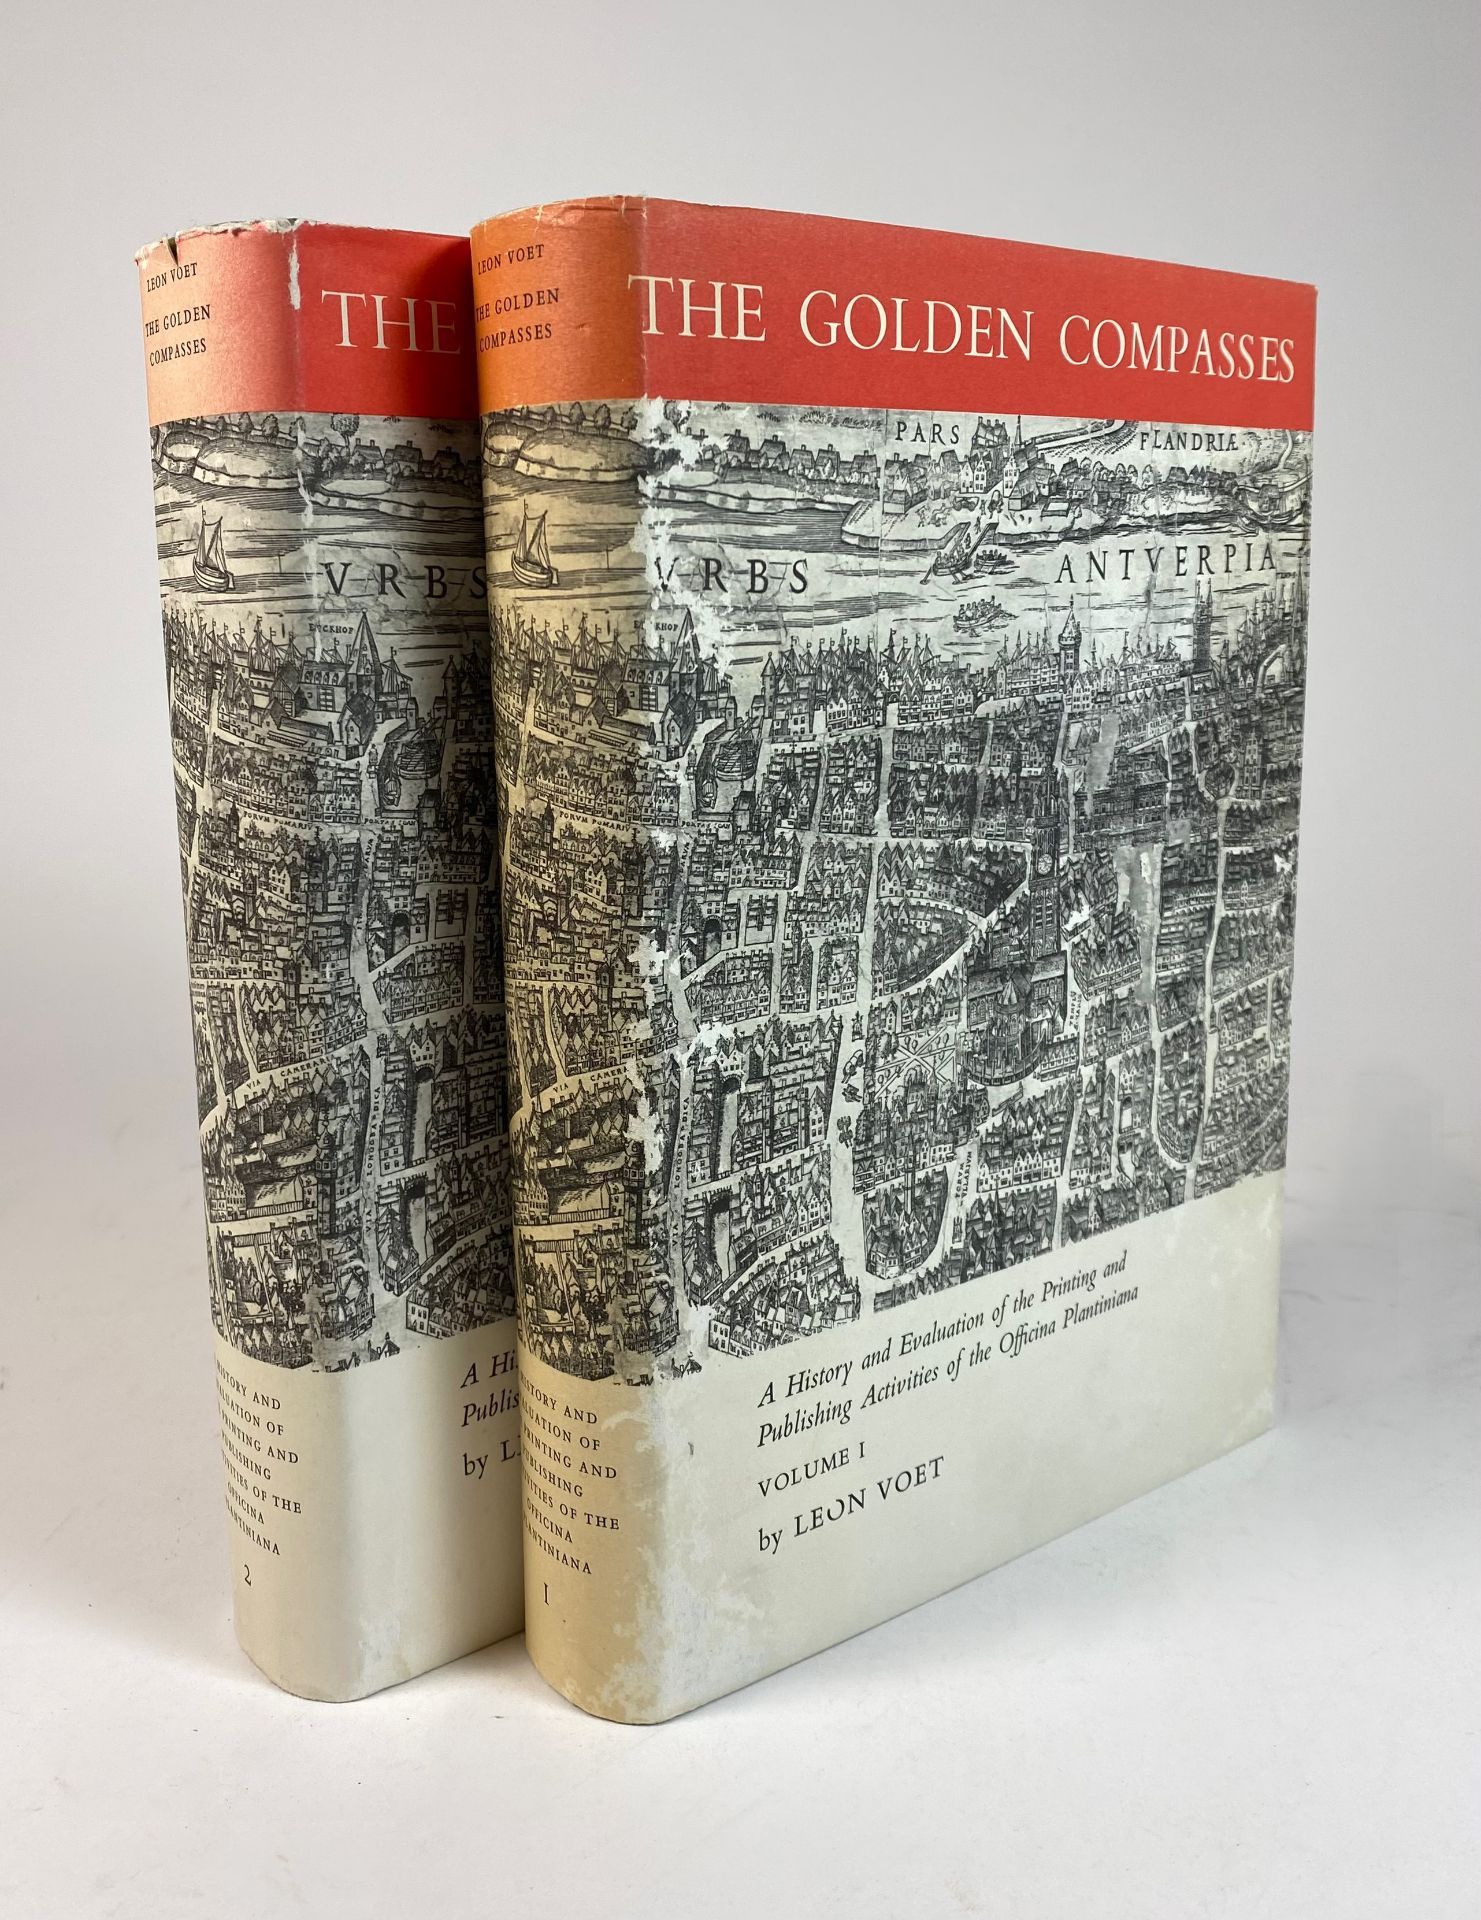 PLANTIN PRESS -- VOET, L. The Golden Compasses. A history & evaluation of the